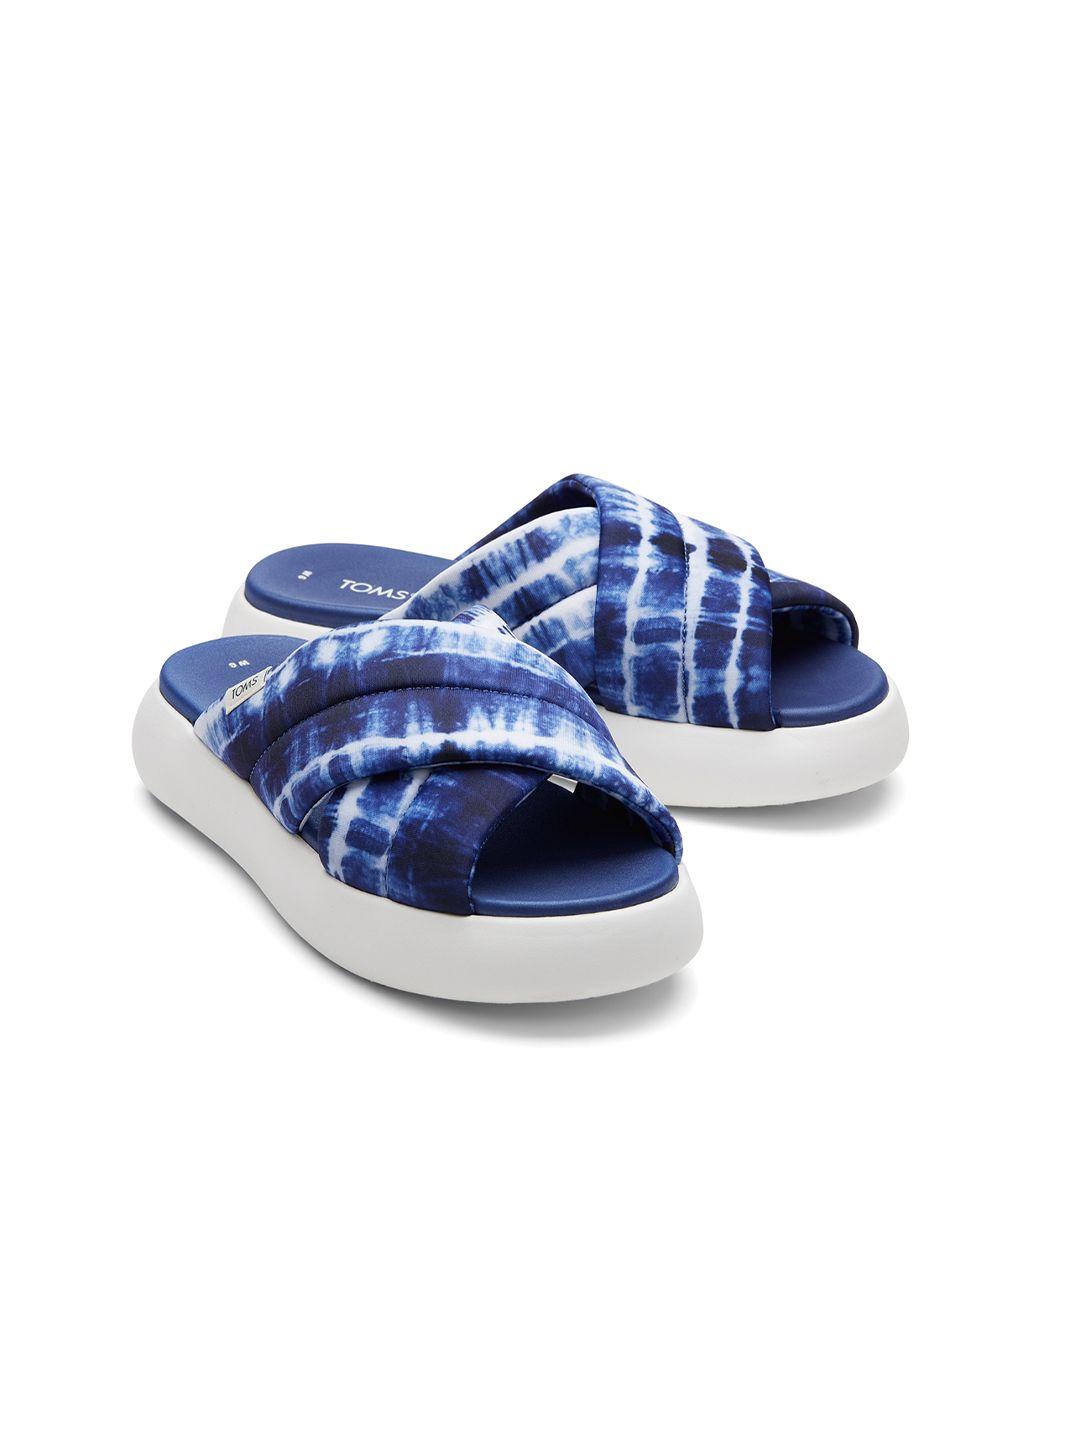 toms women blue printed rubber sliders